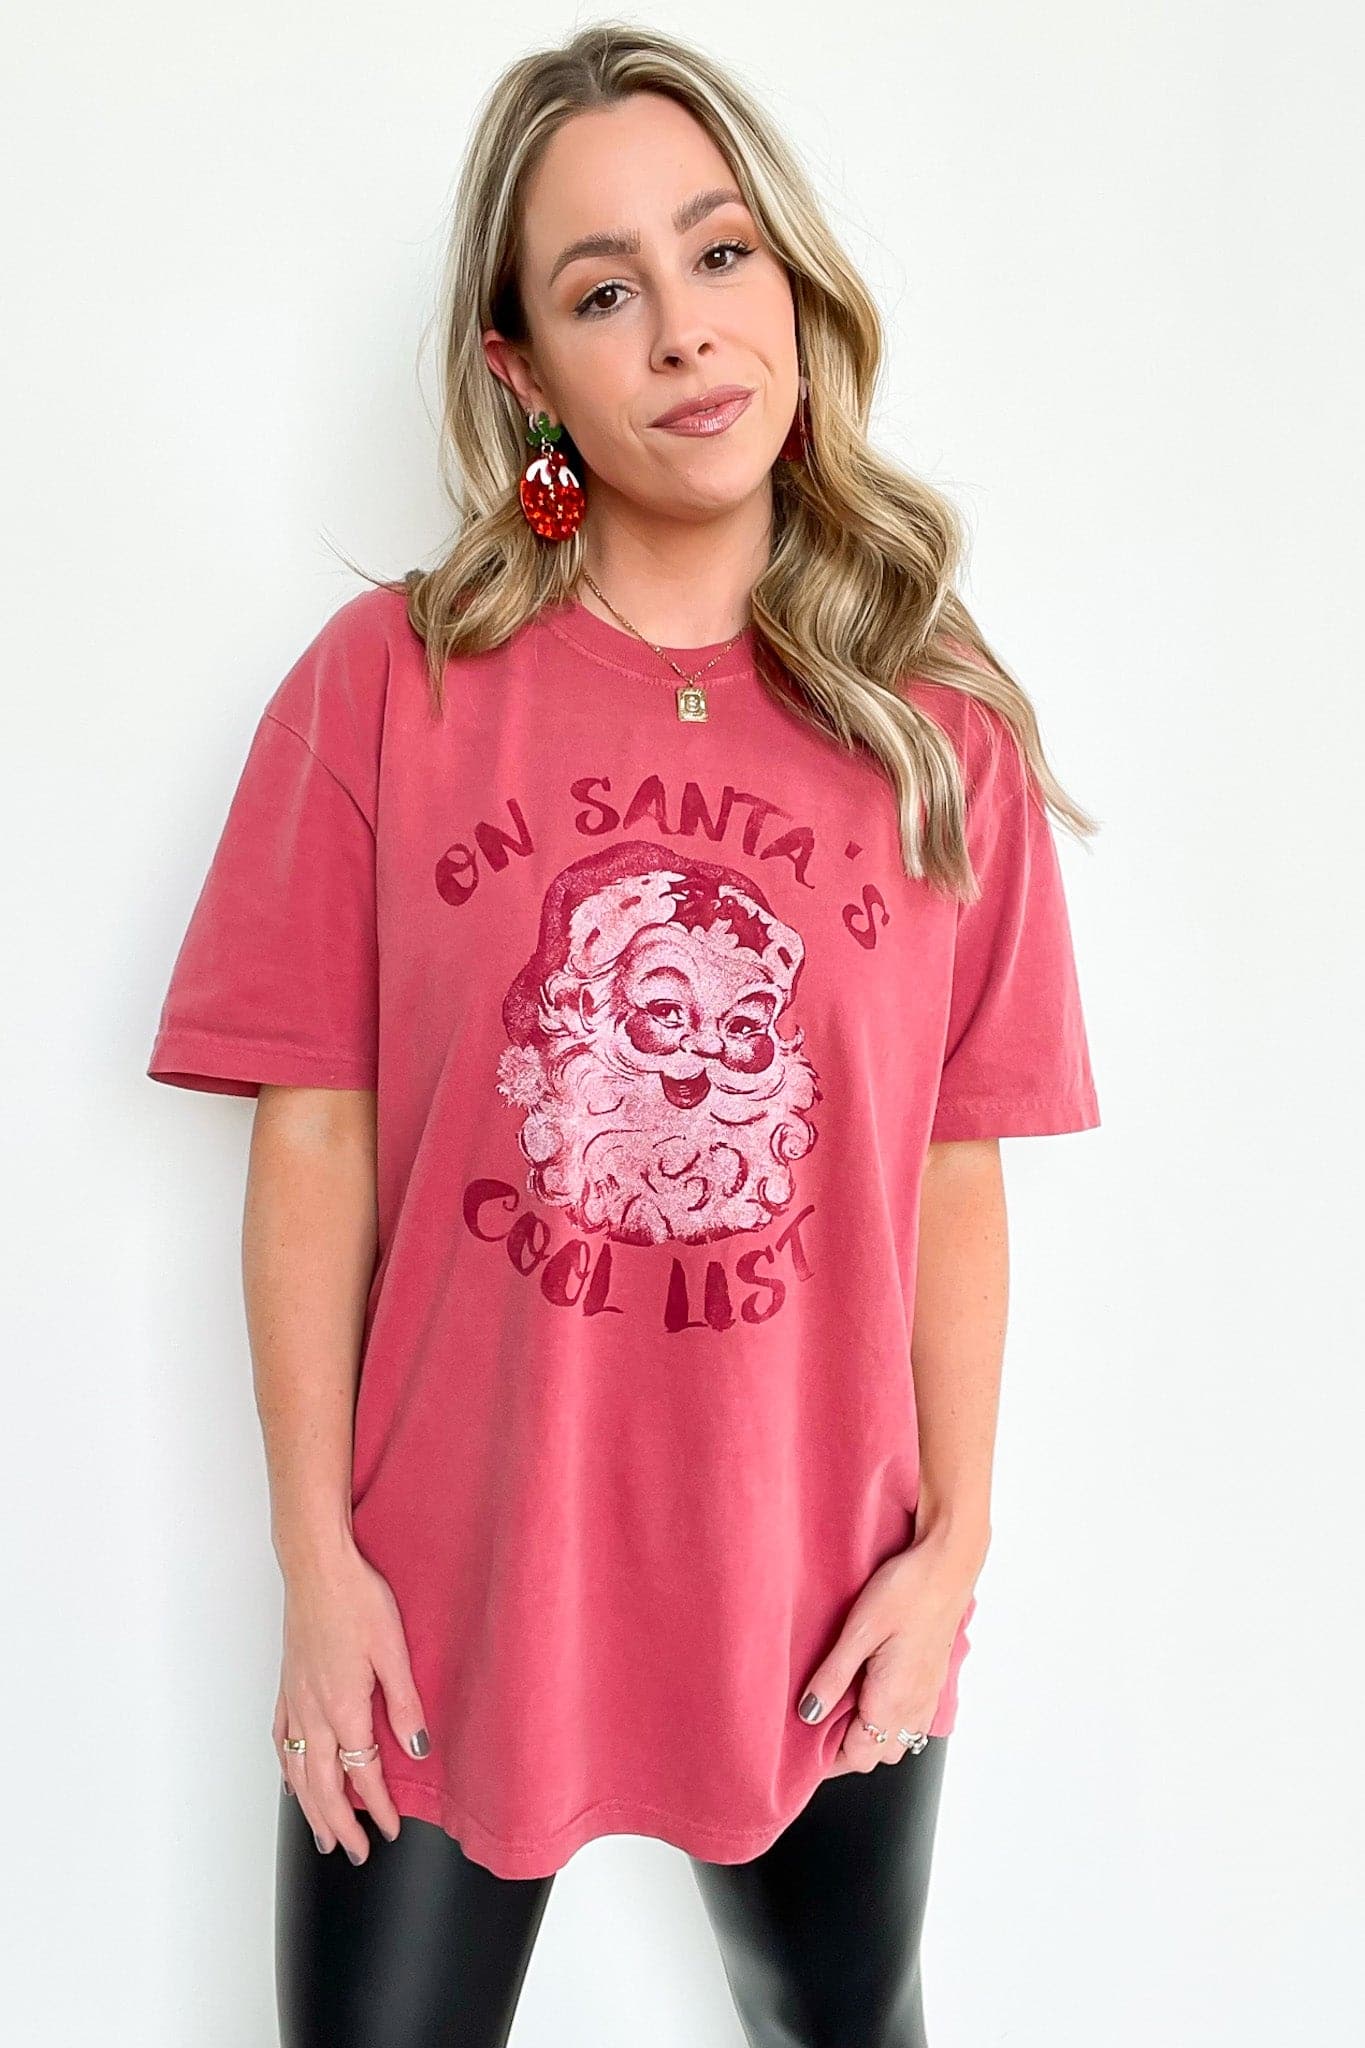  DOORBUSTER On Santa's Cool List Graphic Tee - FINAL SALE - Madison and Mallory